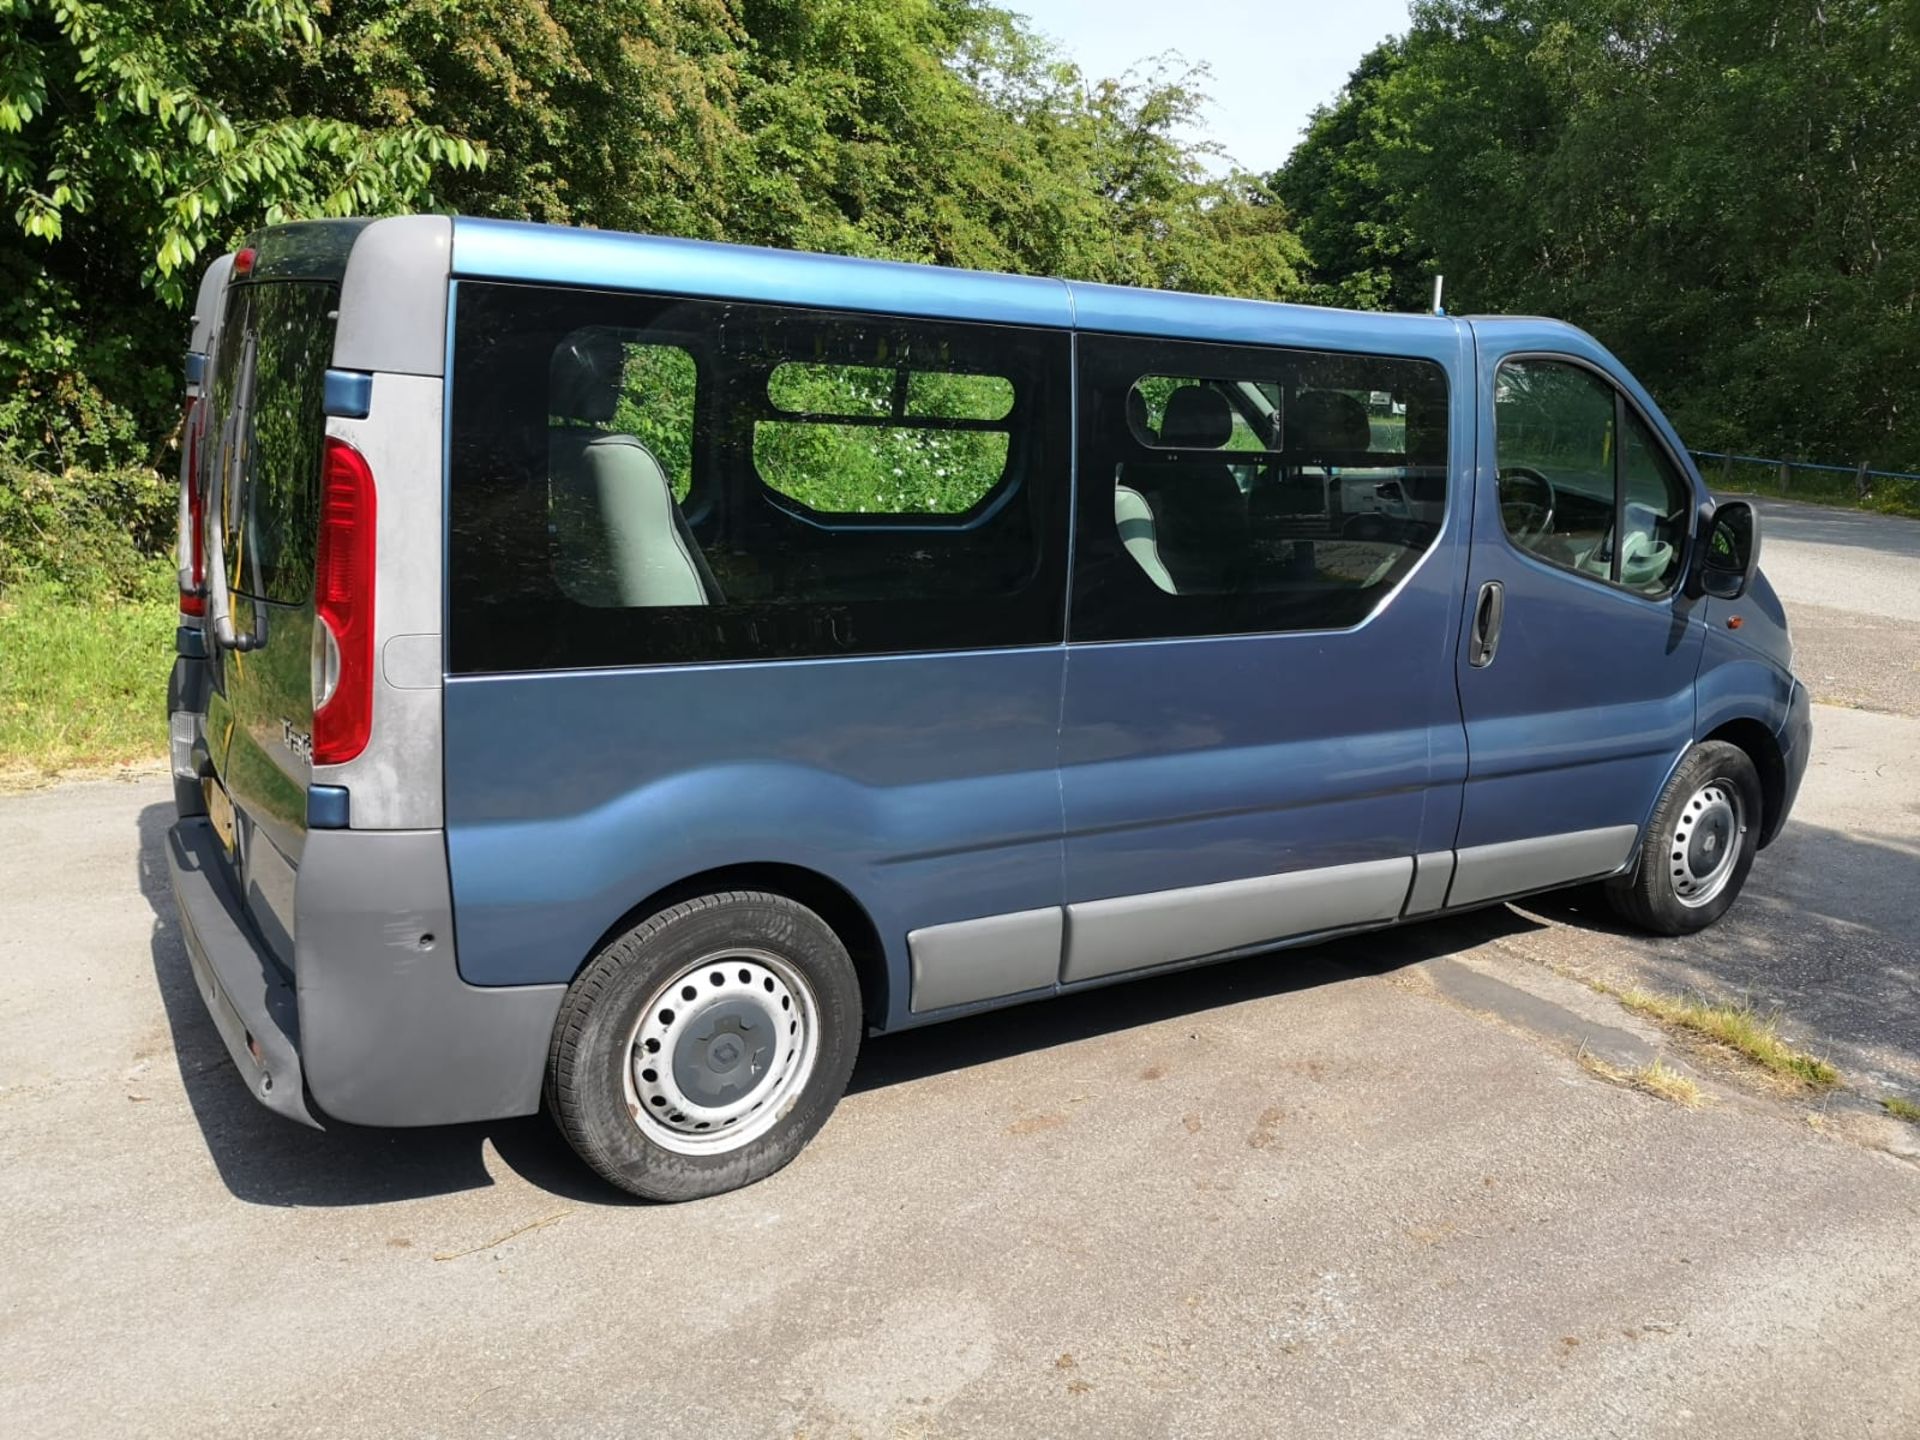 2007/56 REG RENAULT TRAFIC LL29+ DCI 115 2.0 DIESEL DISABLED ACCESS VAN, SHOWING 2 FORMER KEEPERS - Image 6 of 19